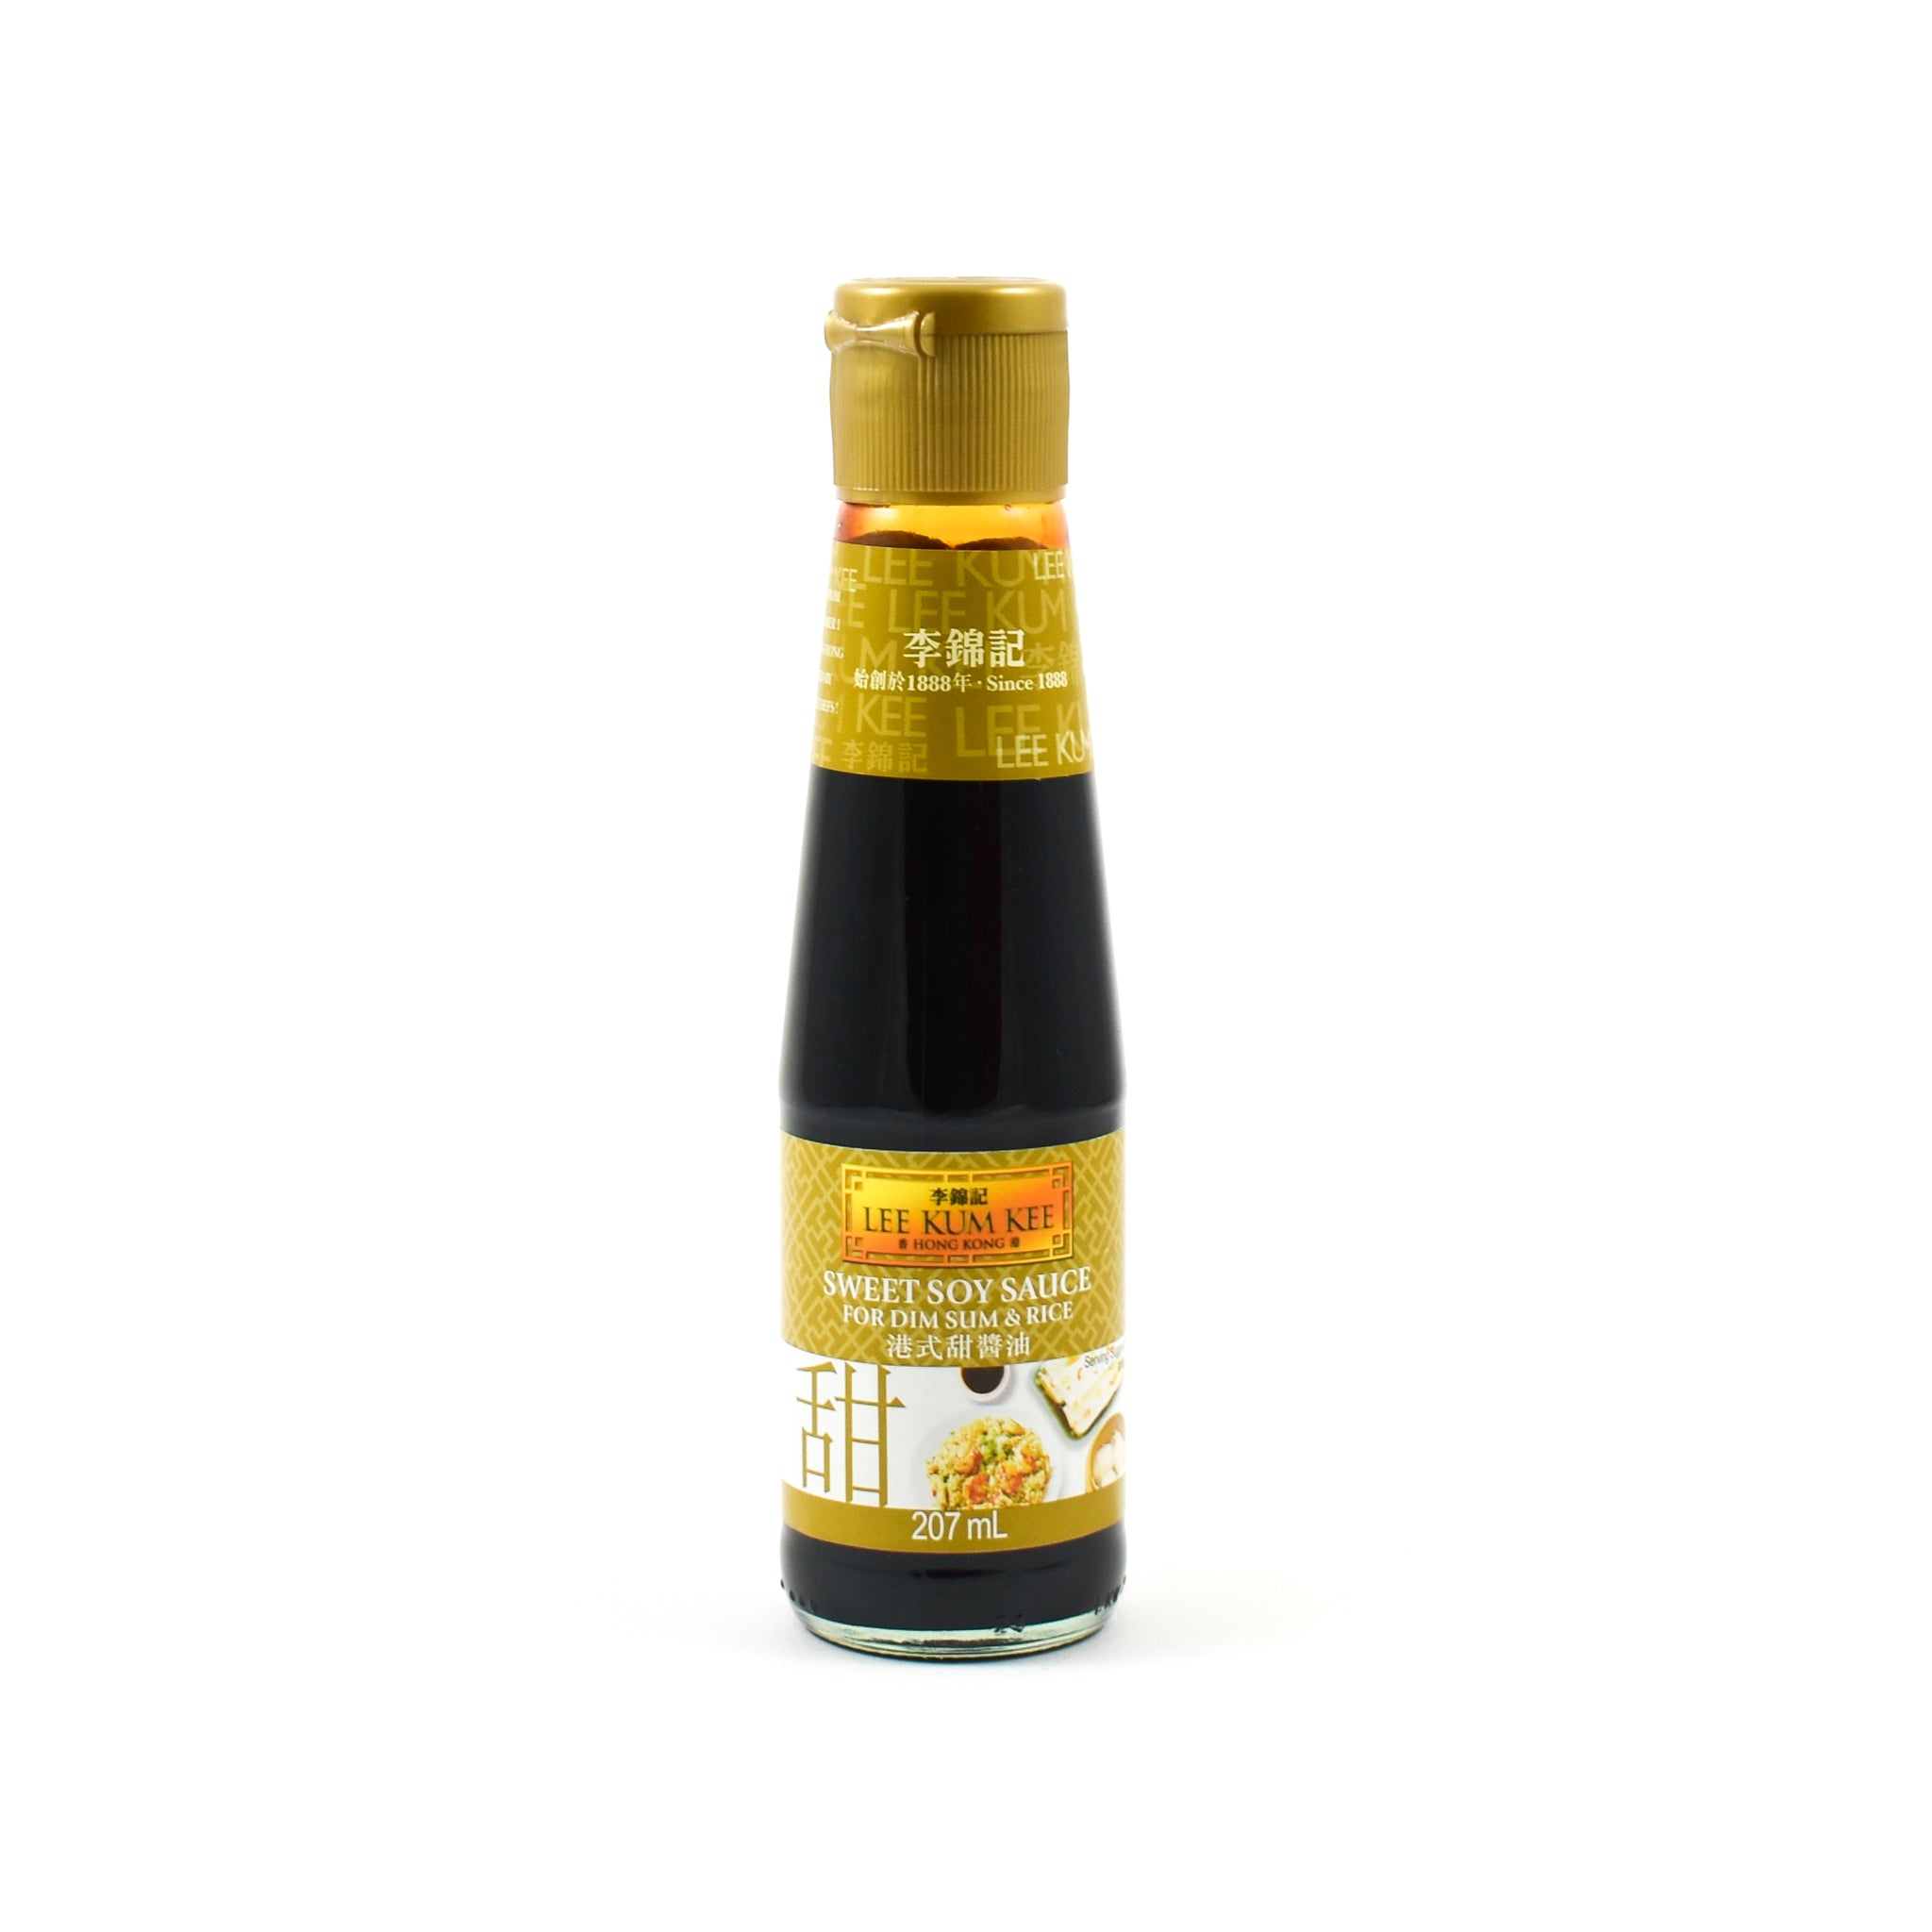 Lee Kum Kee Sweet Soy Sauce - Buy online today at Sous Chef UK